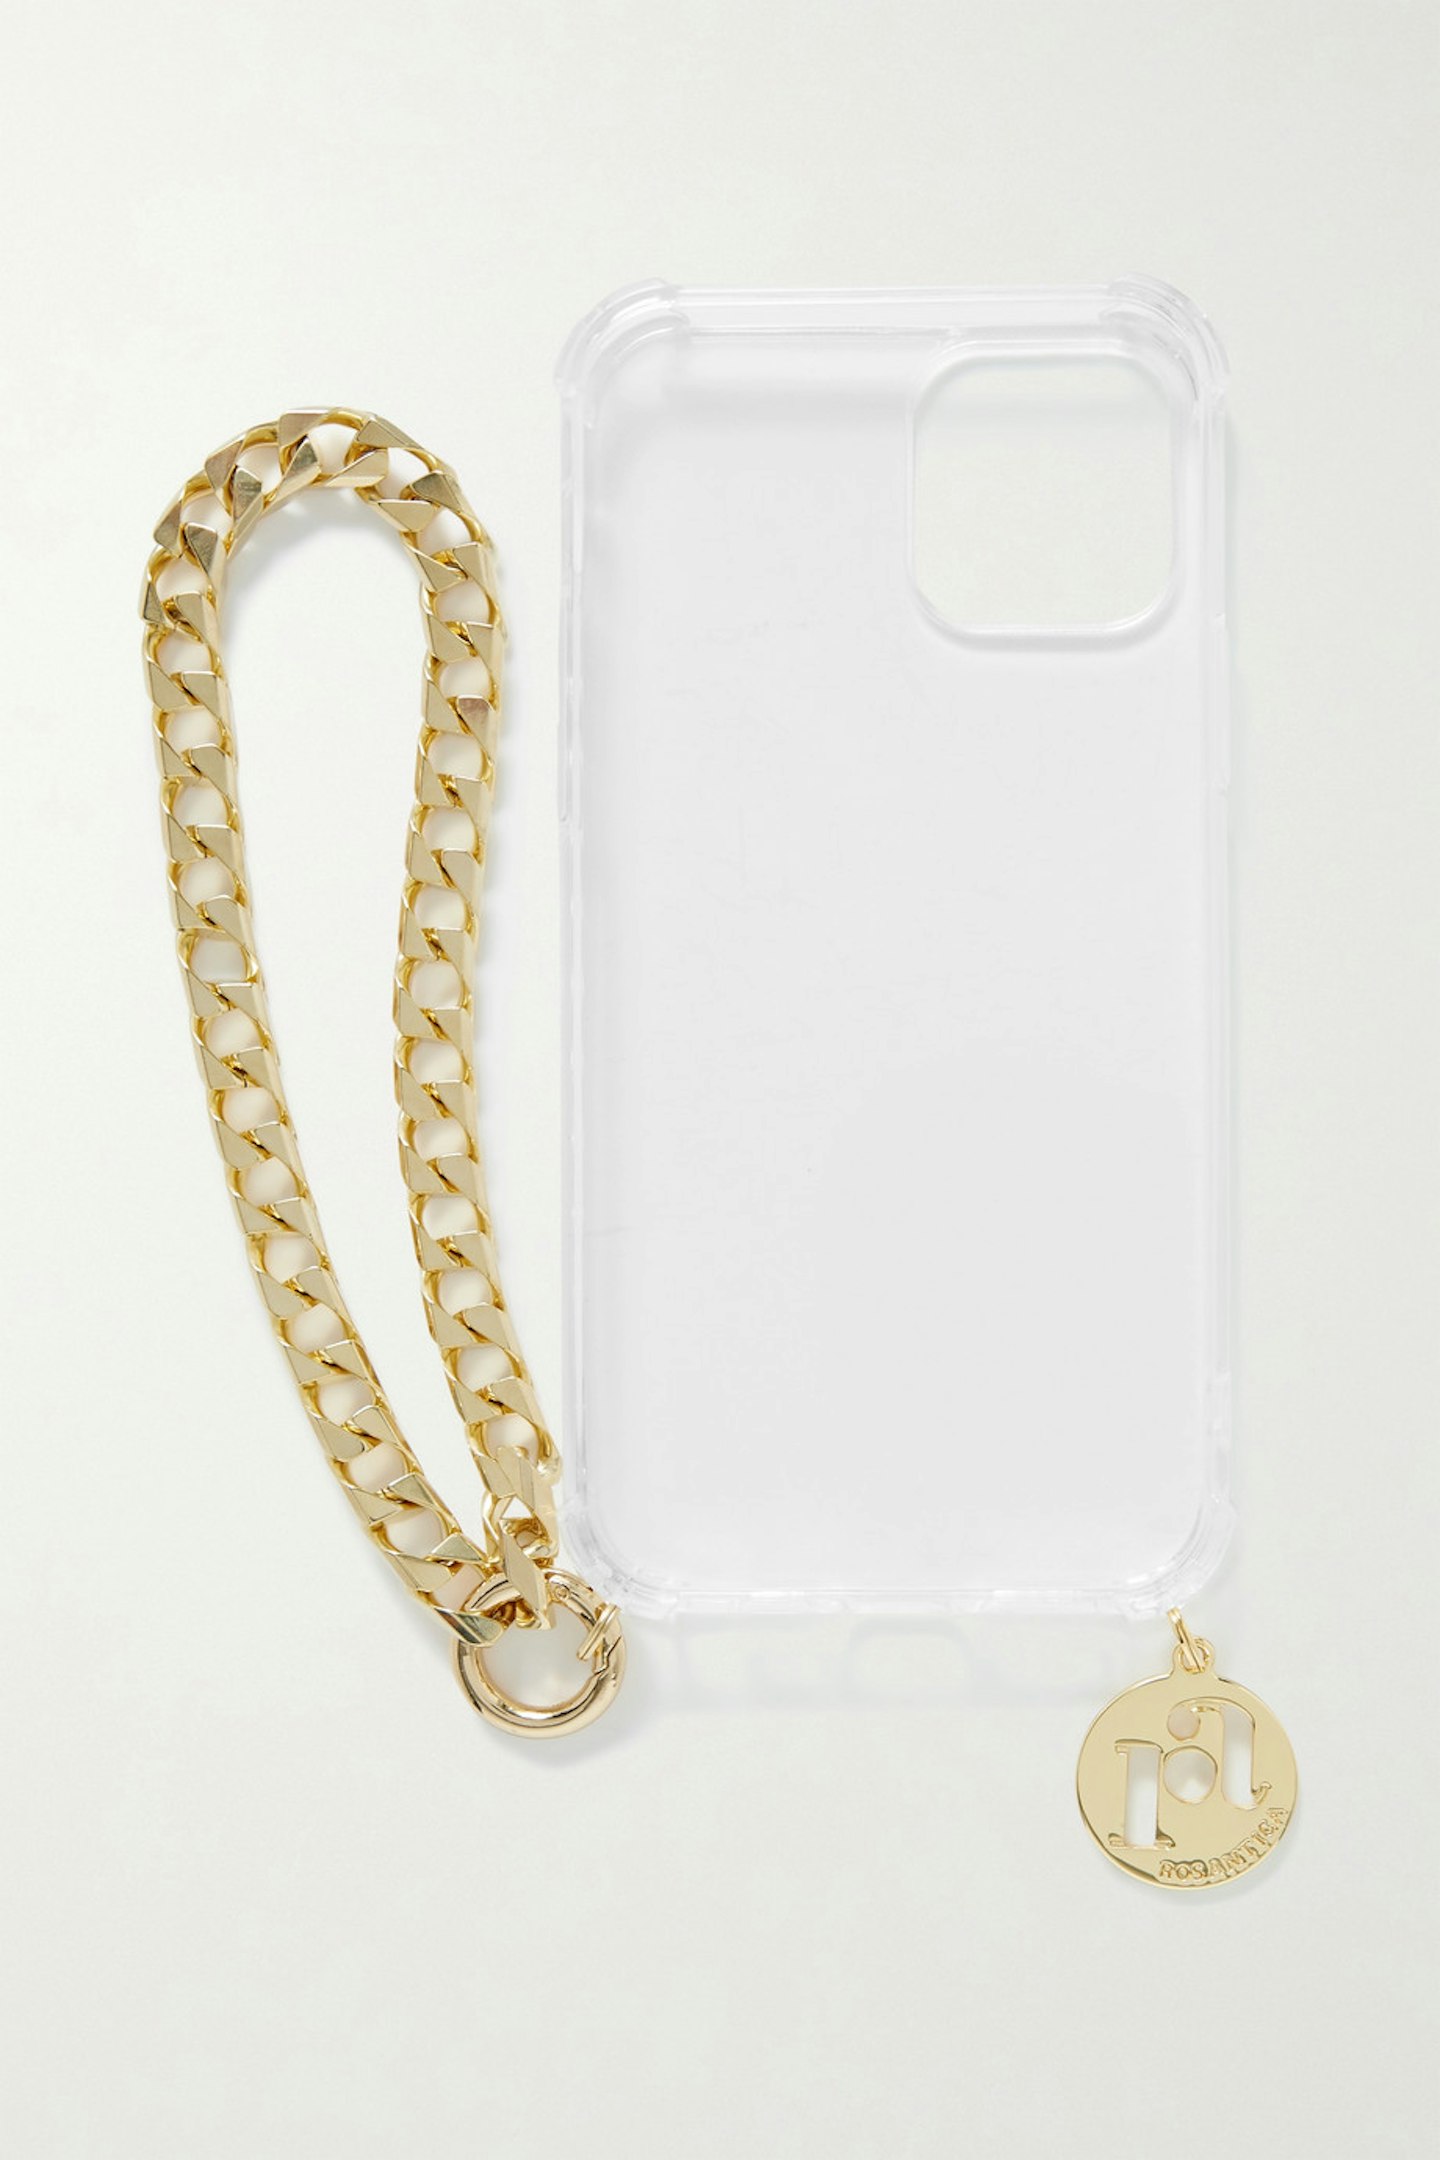 Rosantica, Gas Gas Perspex and gold-tone iPhone 12 case, £115